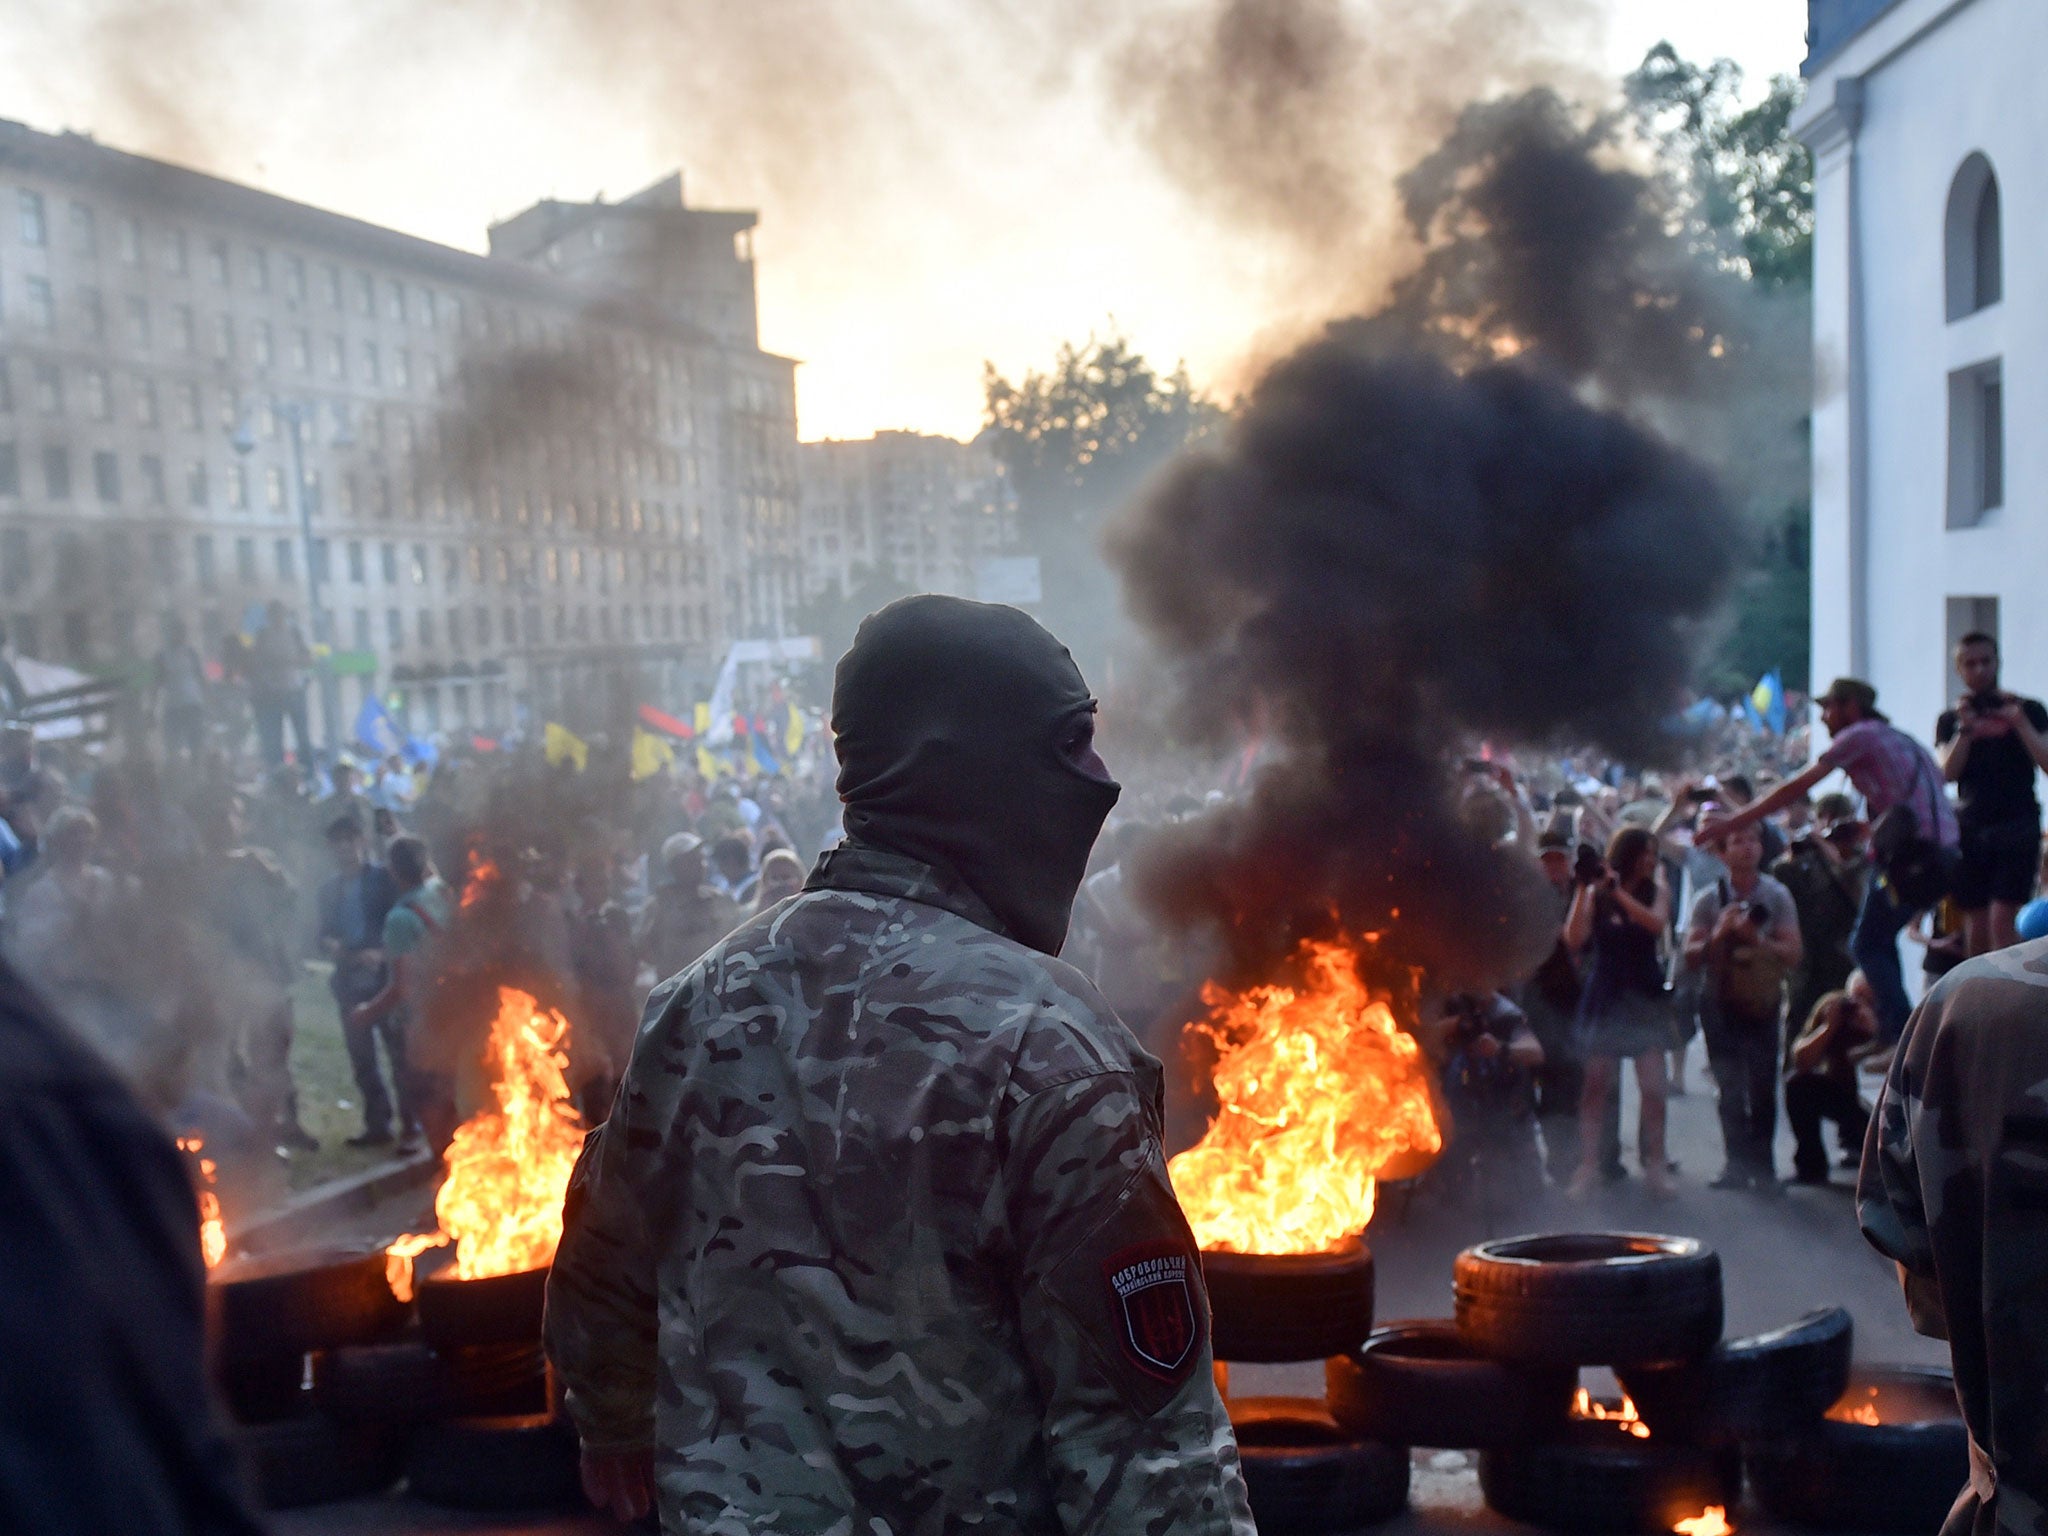 A far-right activist stands in front of a blaze of tyres near the Ukrainian government building in central Kiev